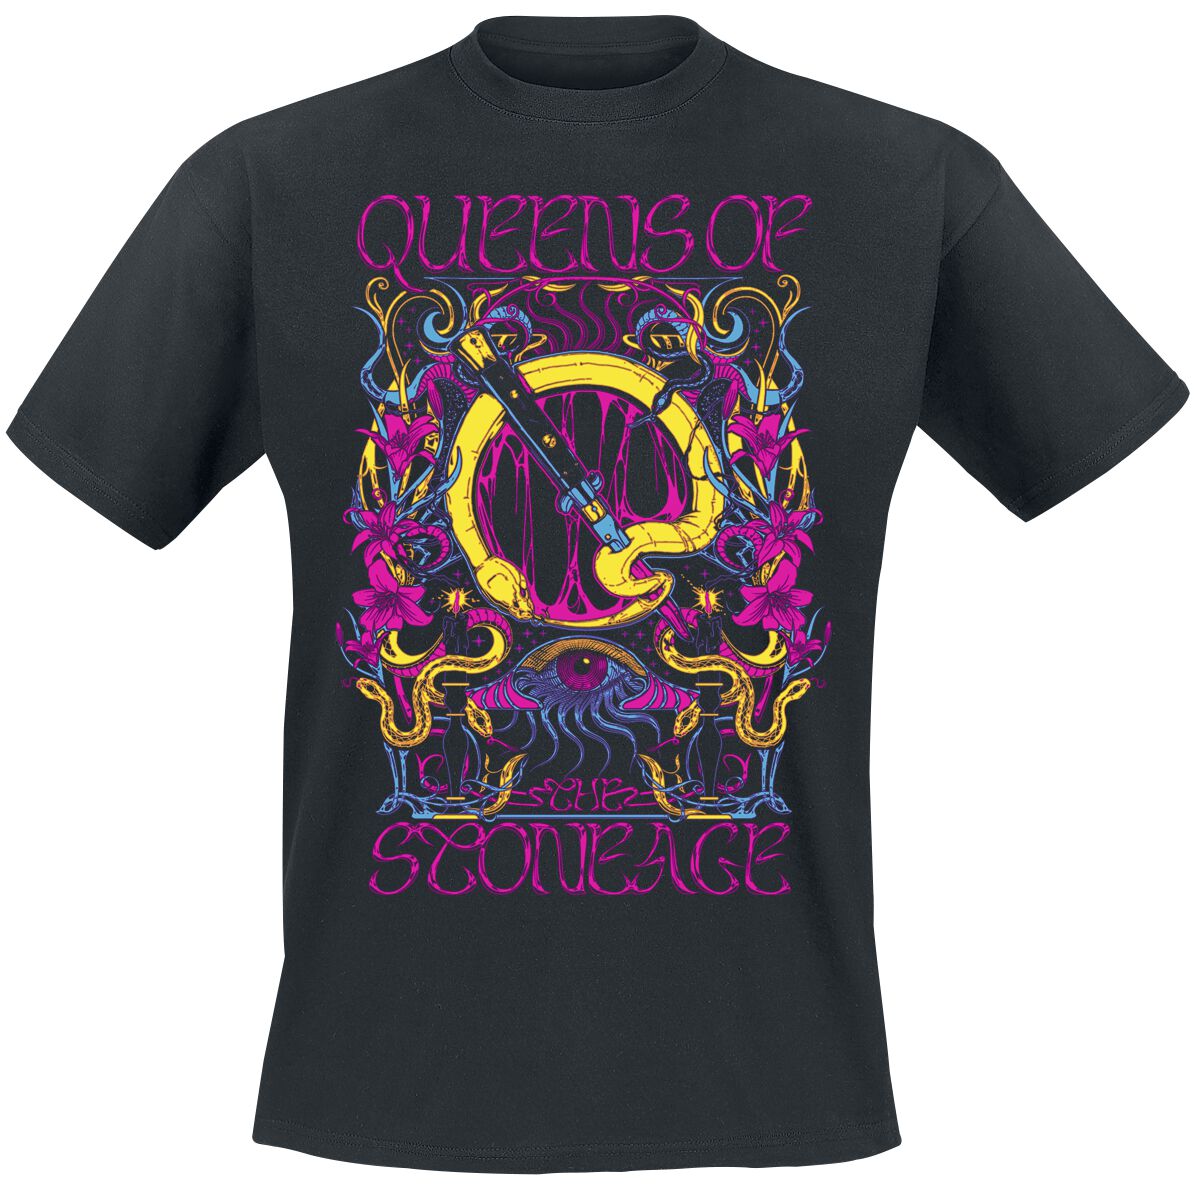 Queens Of The Stone Age In Times New Roman - Neon Sacrilege T-Shirt schwarz in M